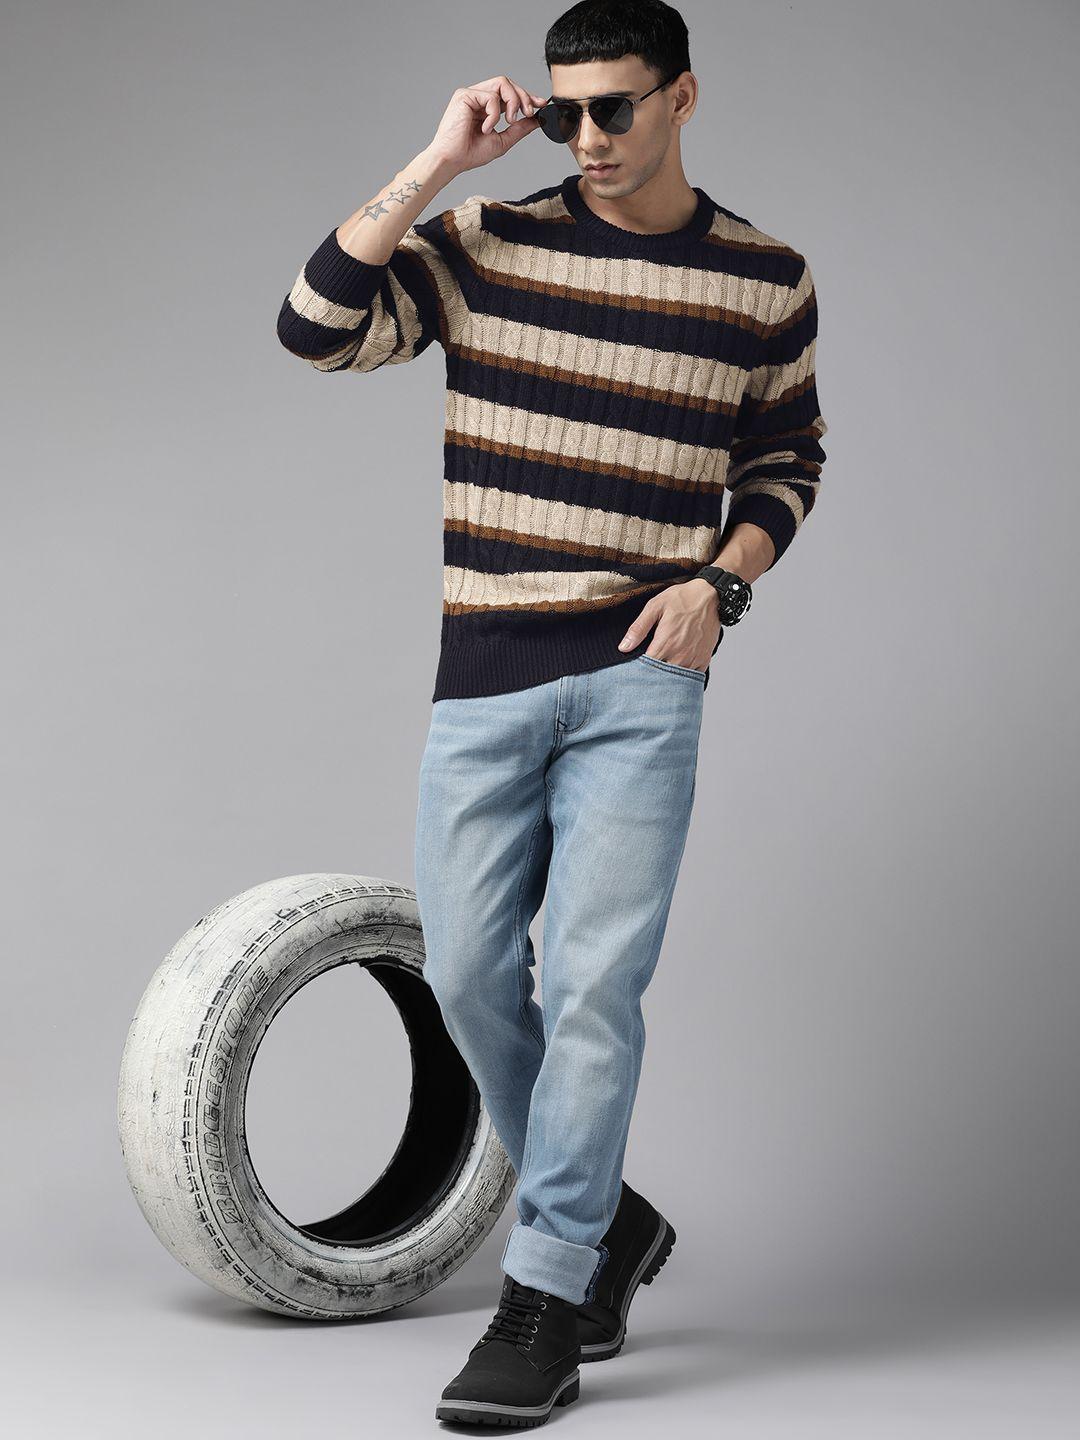 the-roadster-lifestyle-co.-men-navy-blue-&-beige-striped-pullover-sweater